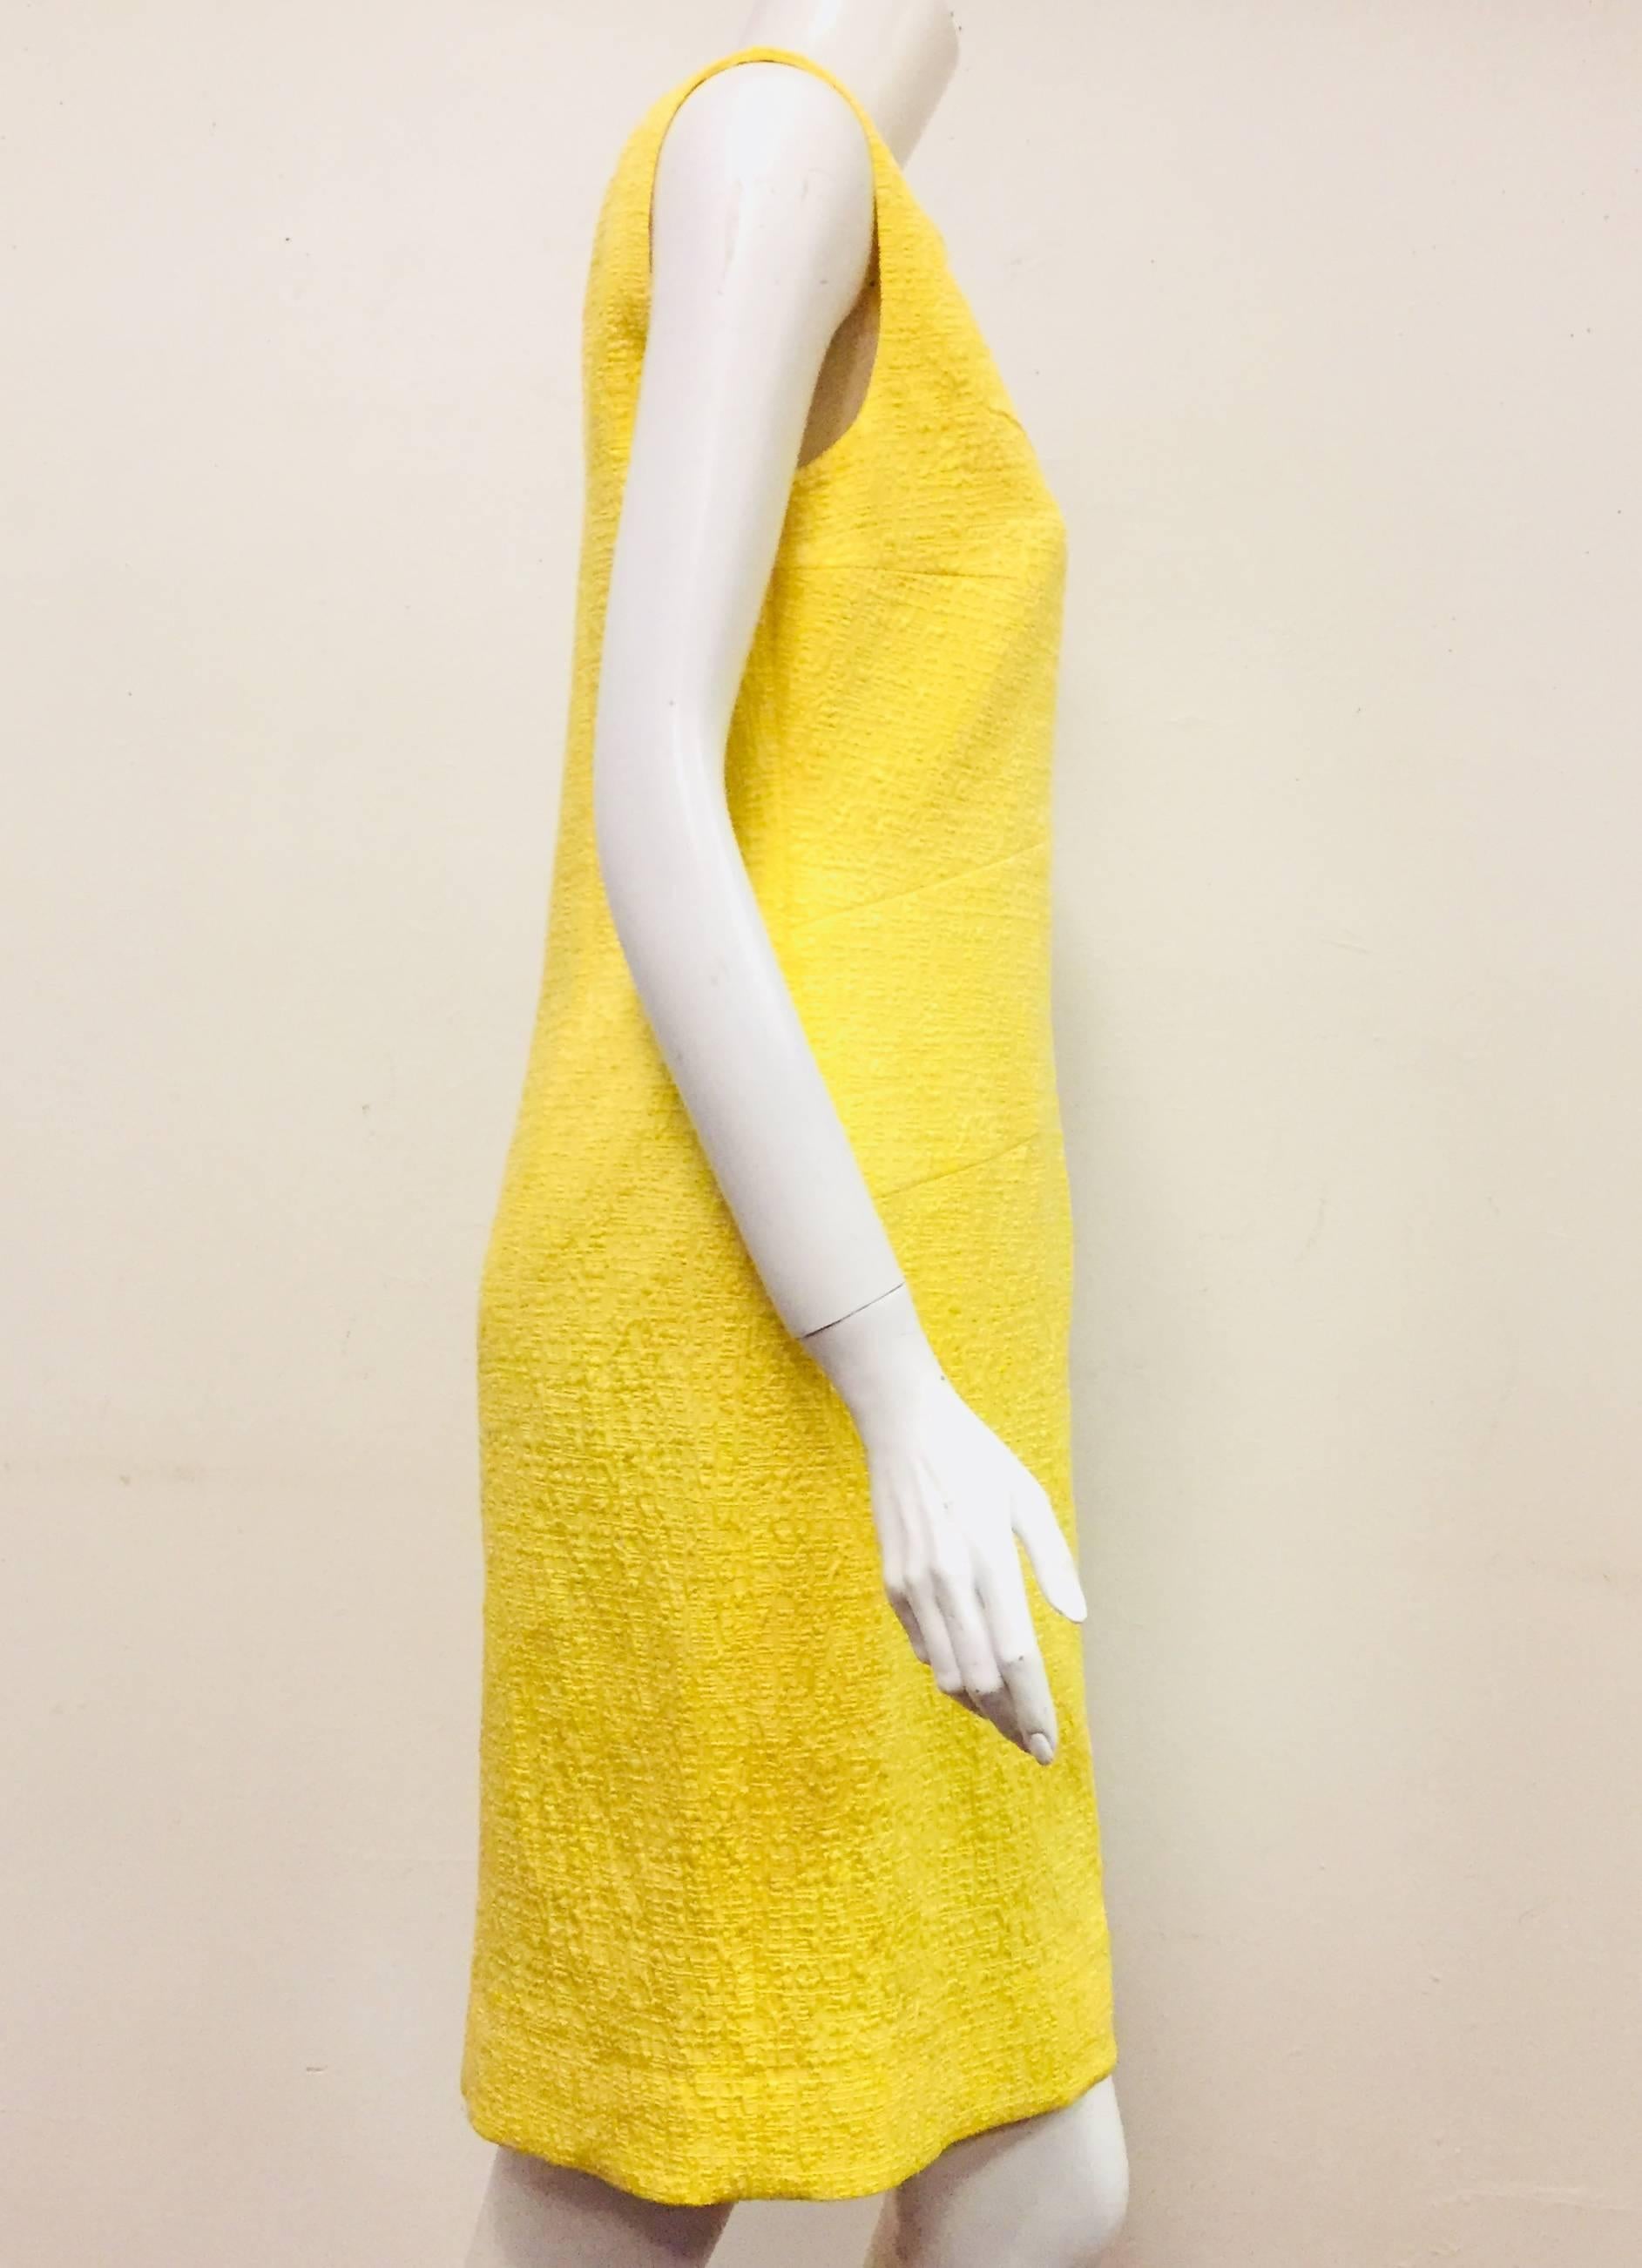 Oscar de la Renta's yellow sleeveless dress outshines the sun!  This cotton blend dress is bright and beautiful and perfect for Spring.  Round neckline and back zipper for closure.  Dramatic darts decorate the front of dress from bust line to upper